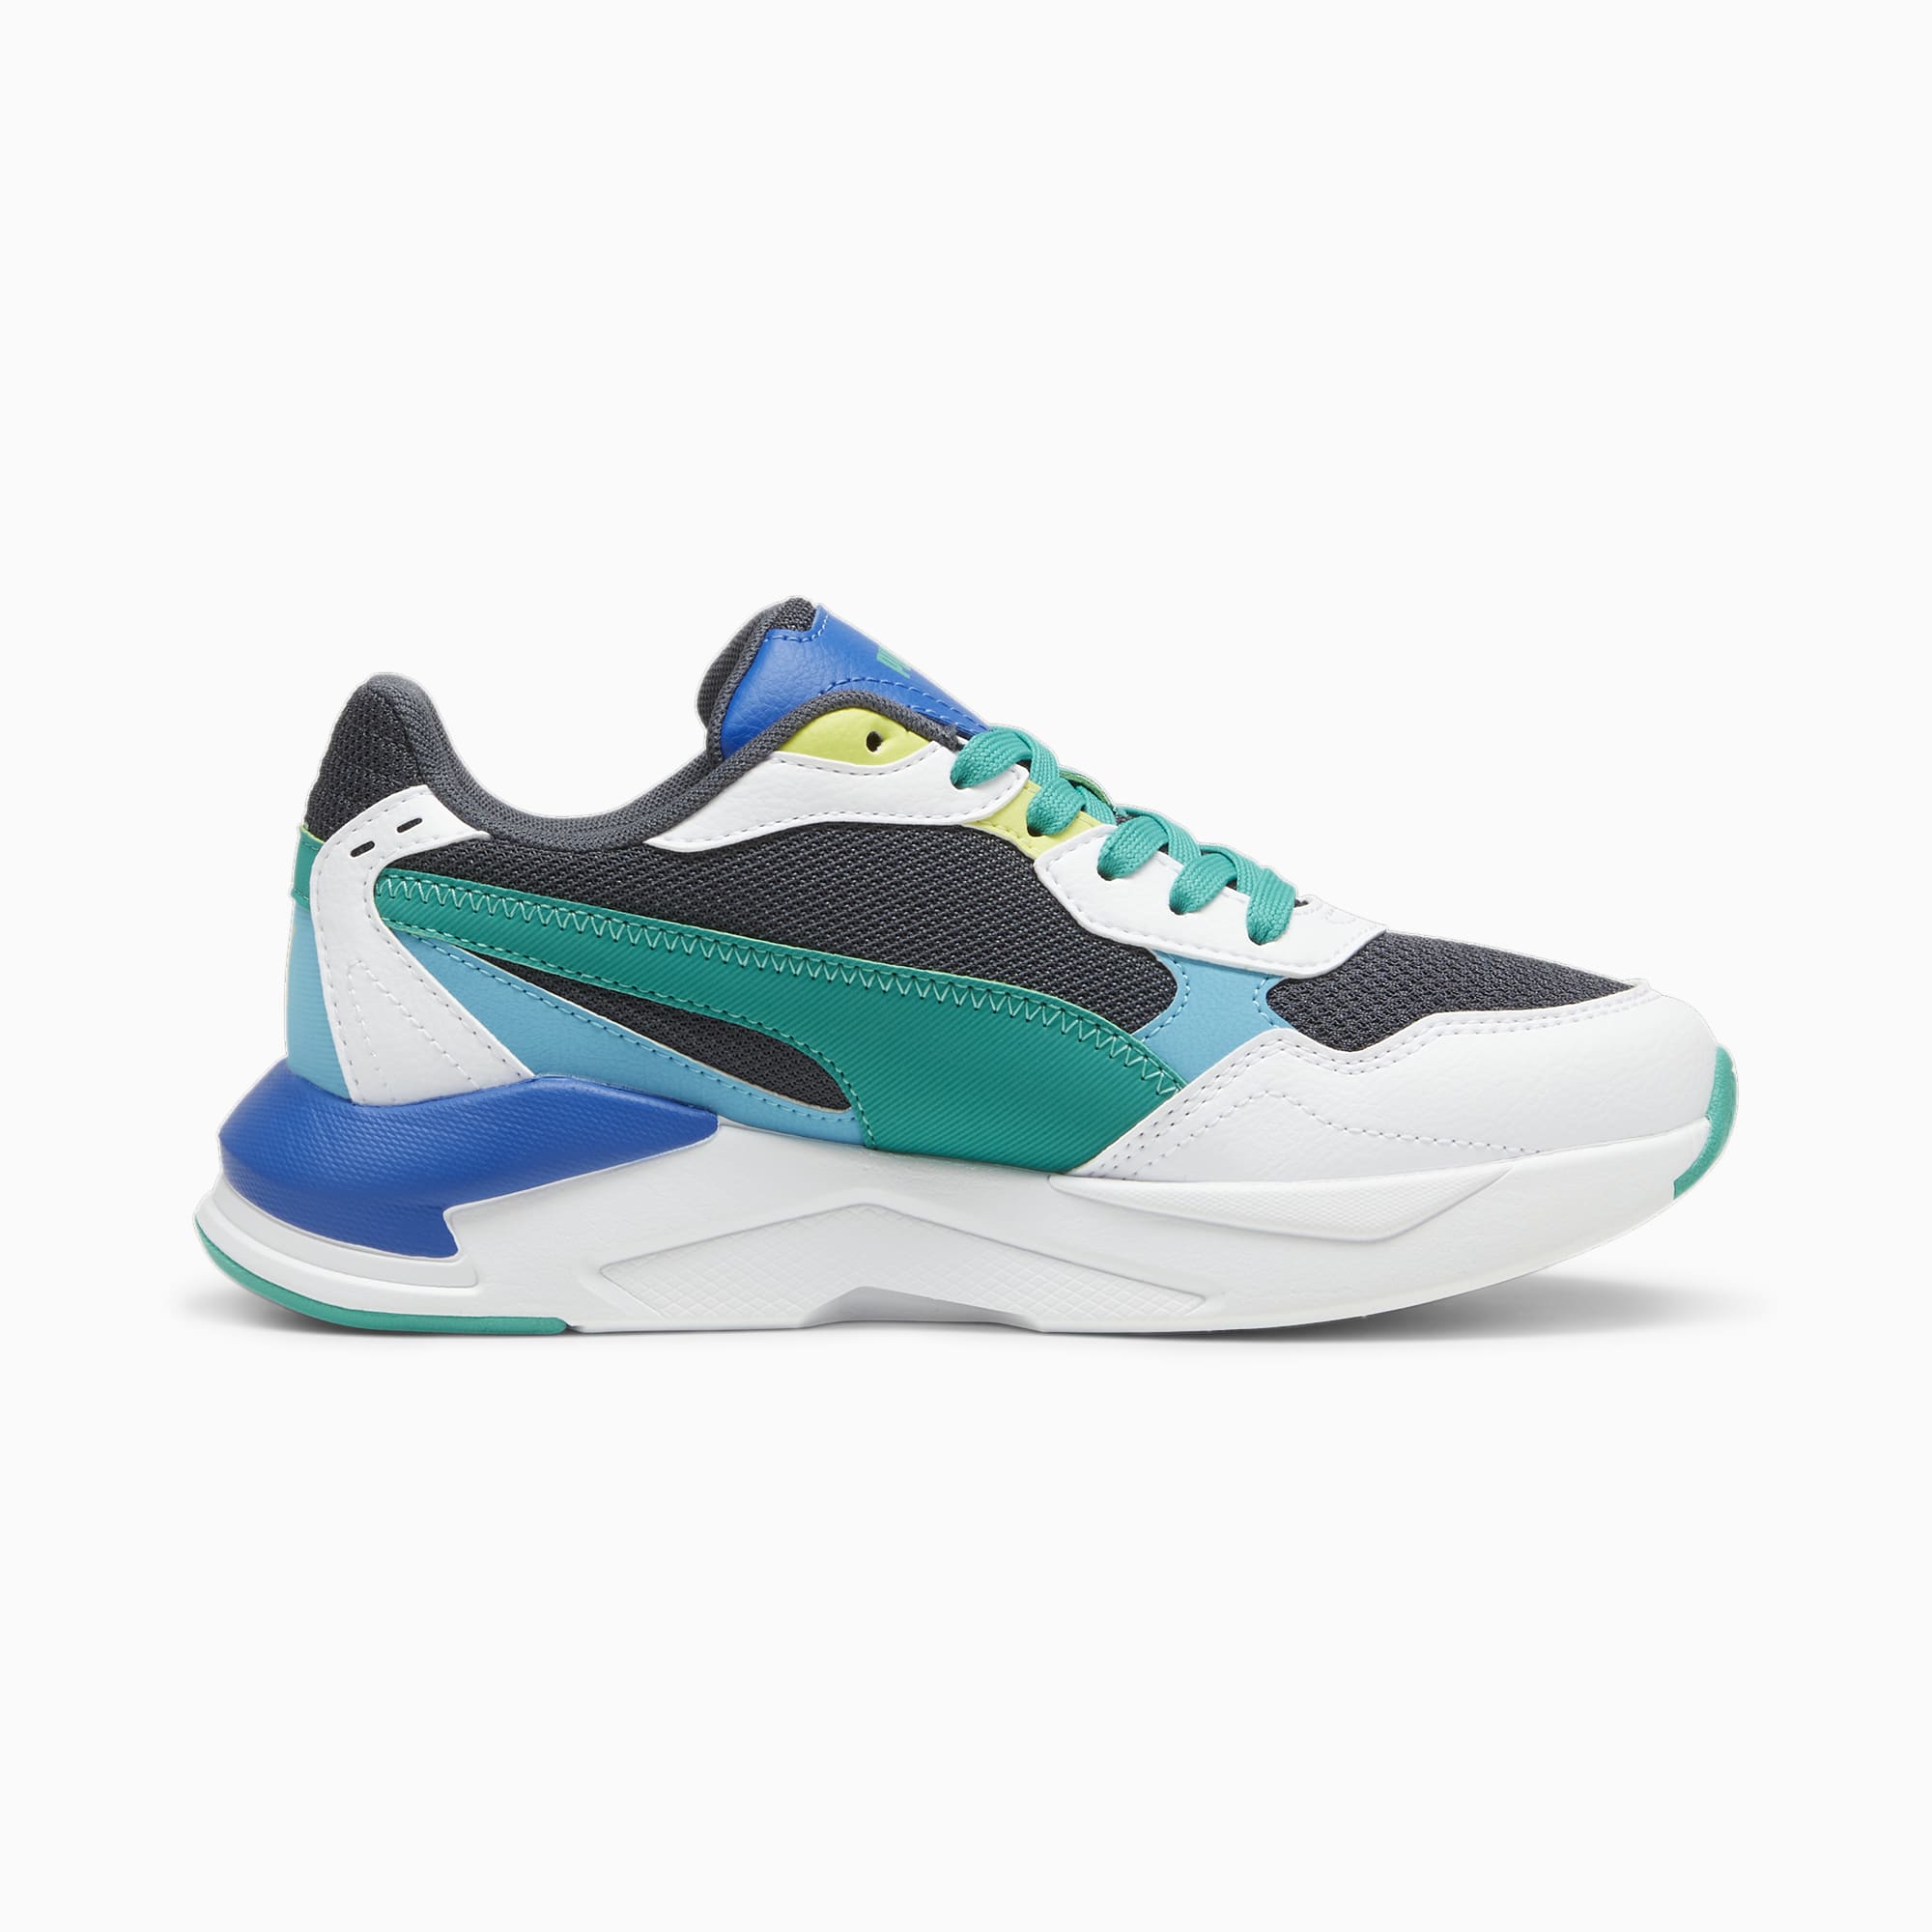 PUMA X-Ray Speed Lite Youth Trainers, Strongray/Sparkling Green/White, Size 35,5, Shoes